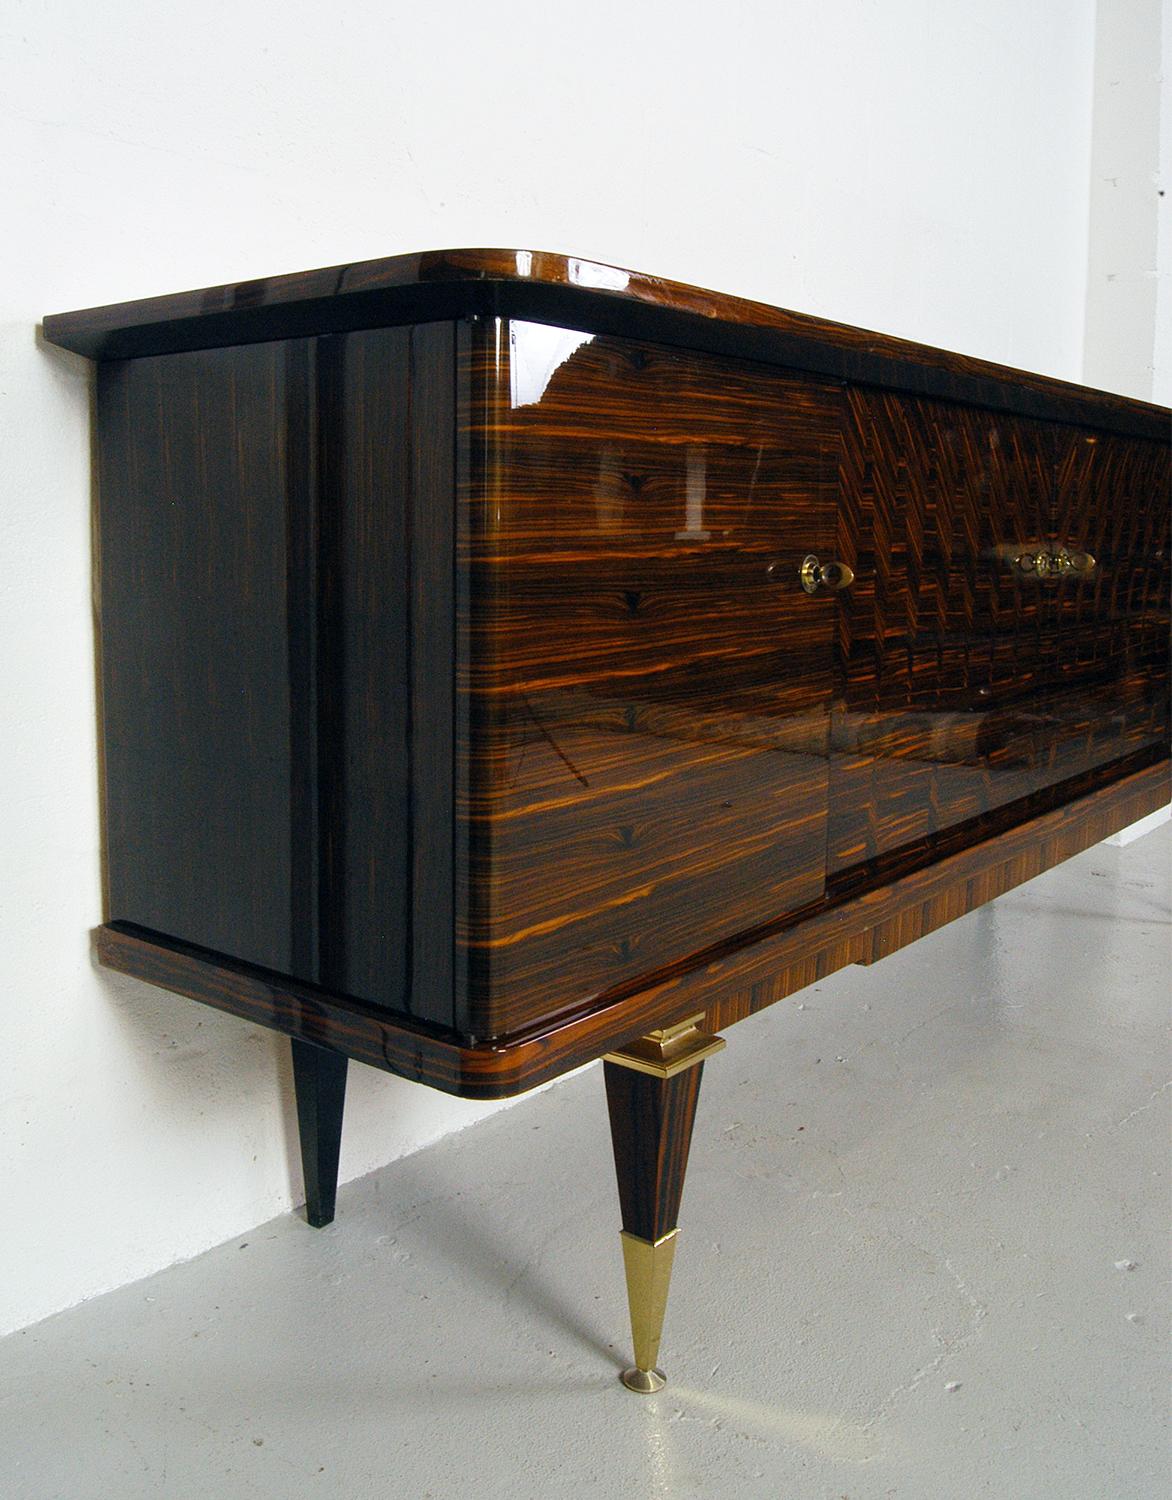 20th Century  French Lacquered Art Deco Sideboard / Credenza in Macassar Ebony and Maple